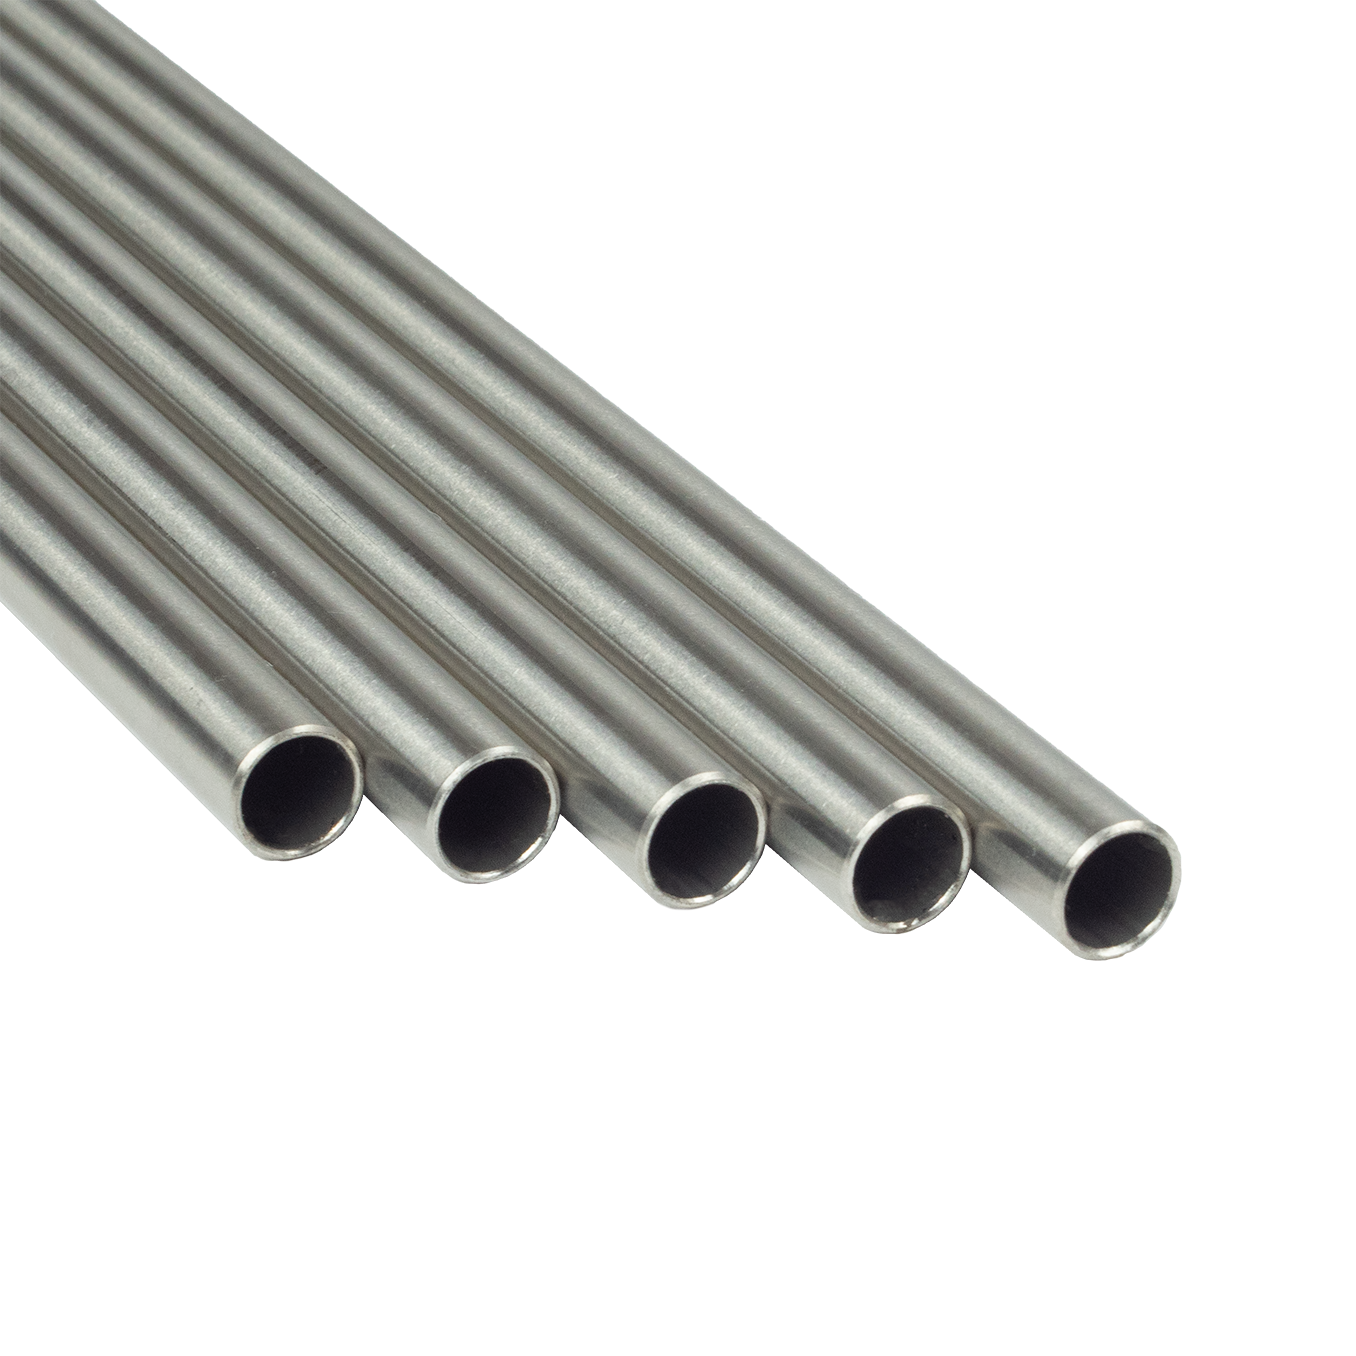 SFS Stand Tube - Ø 13 x 1 mm, length 500 mm - stainless steel